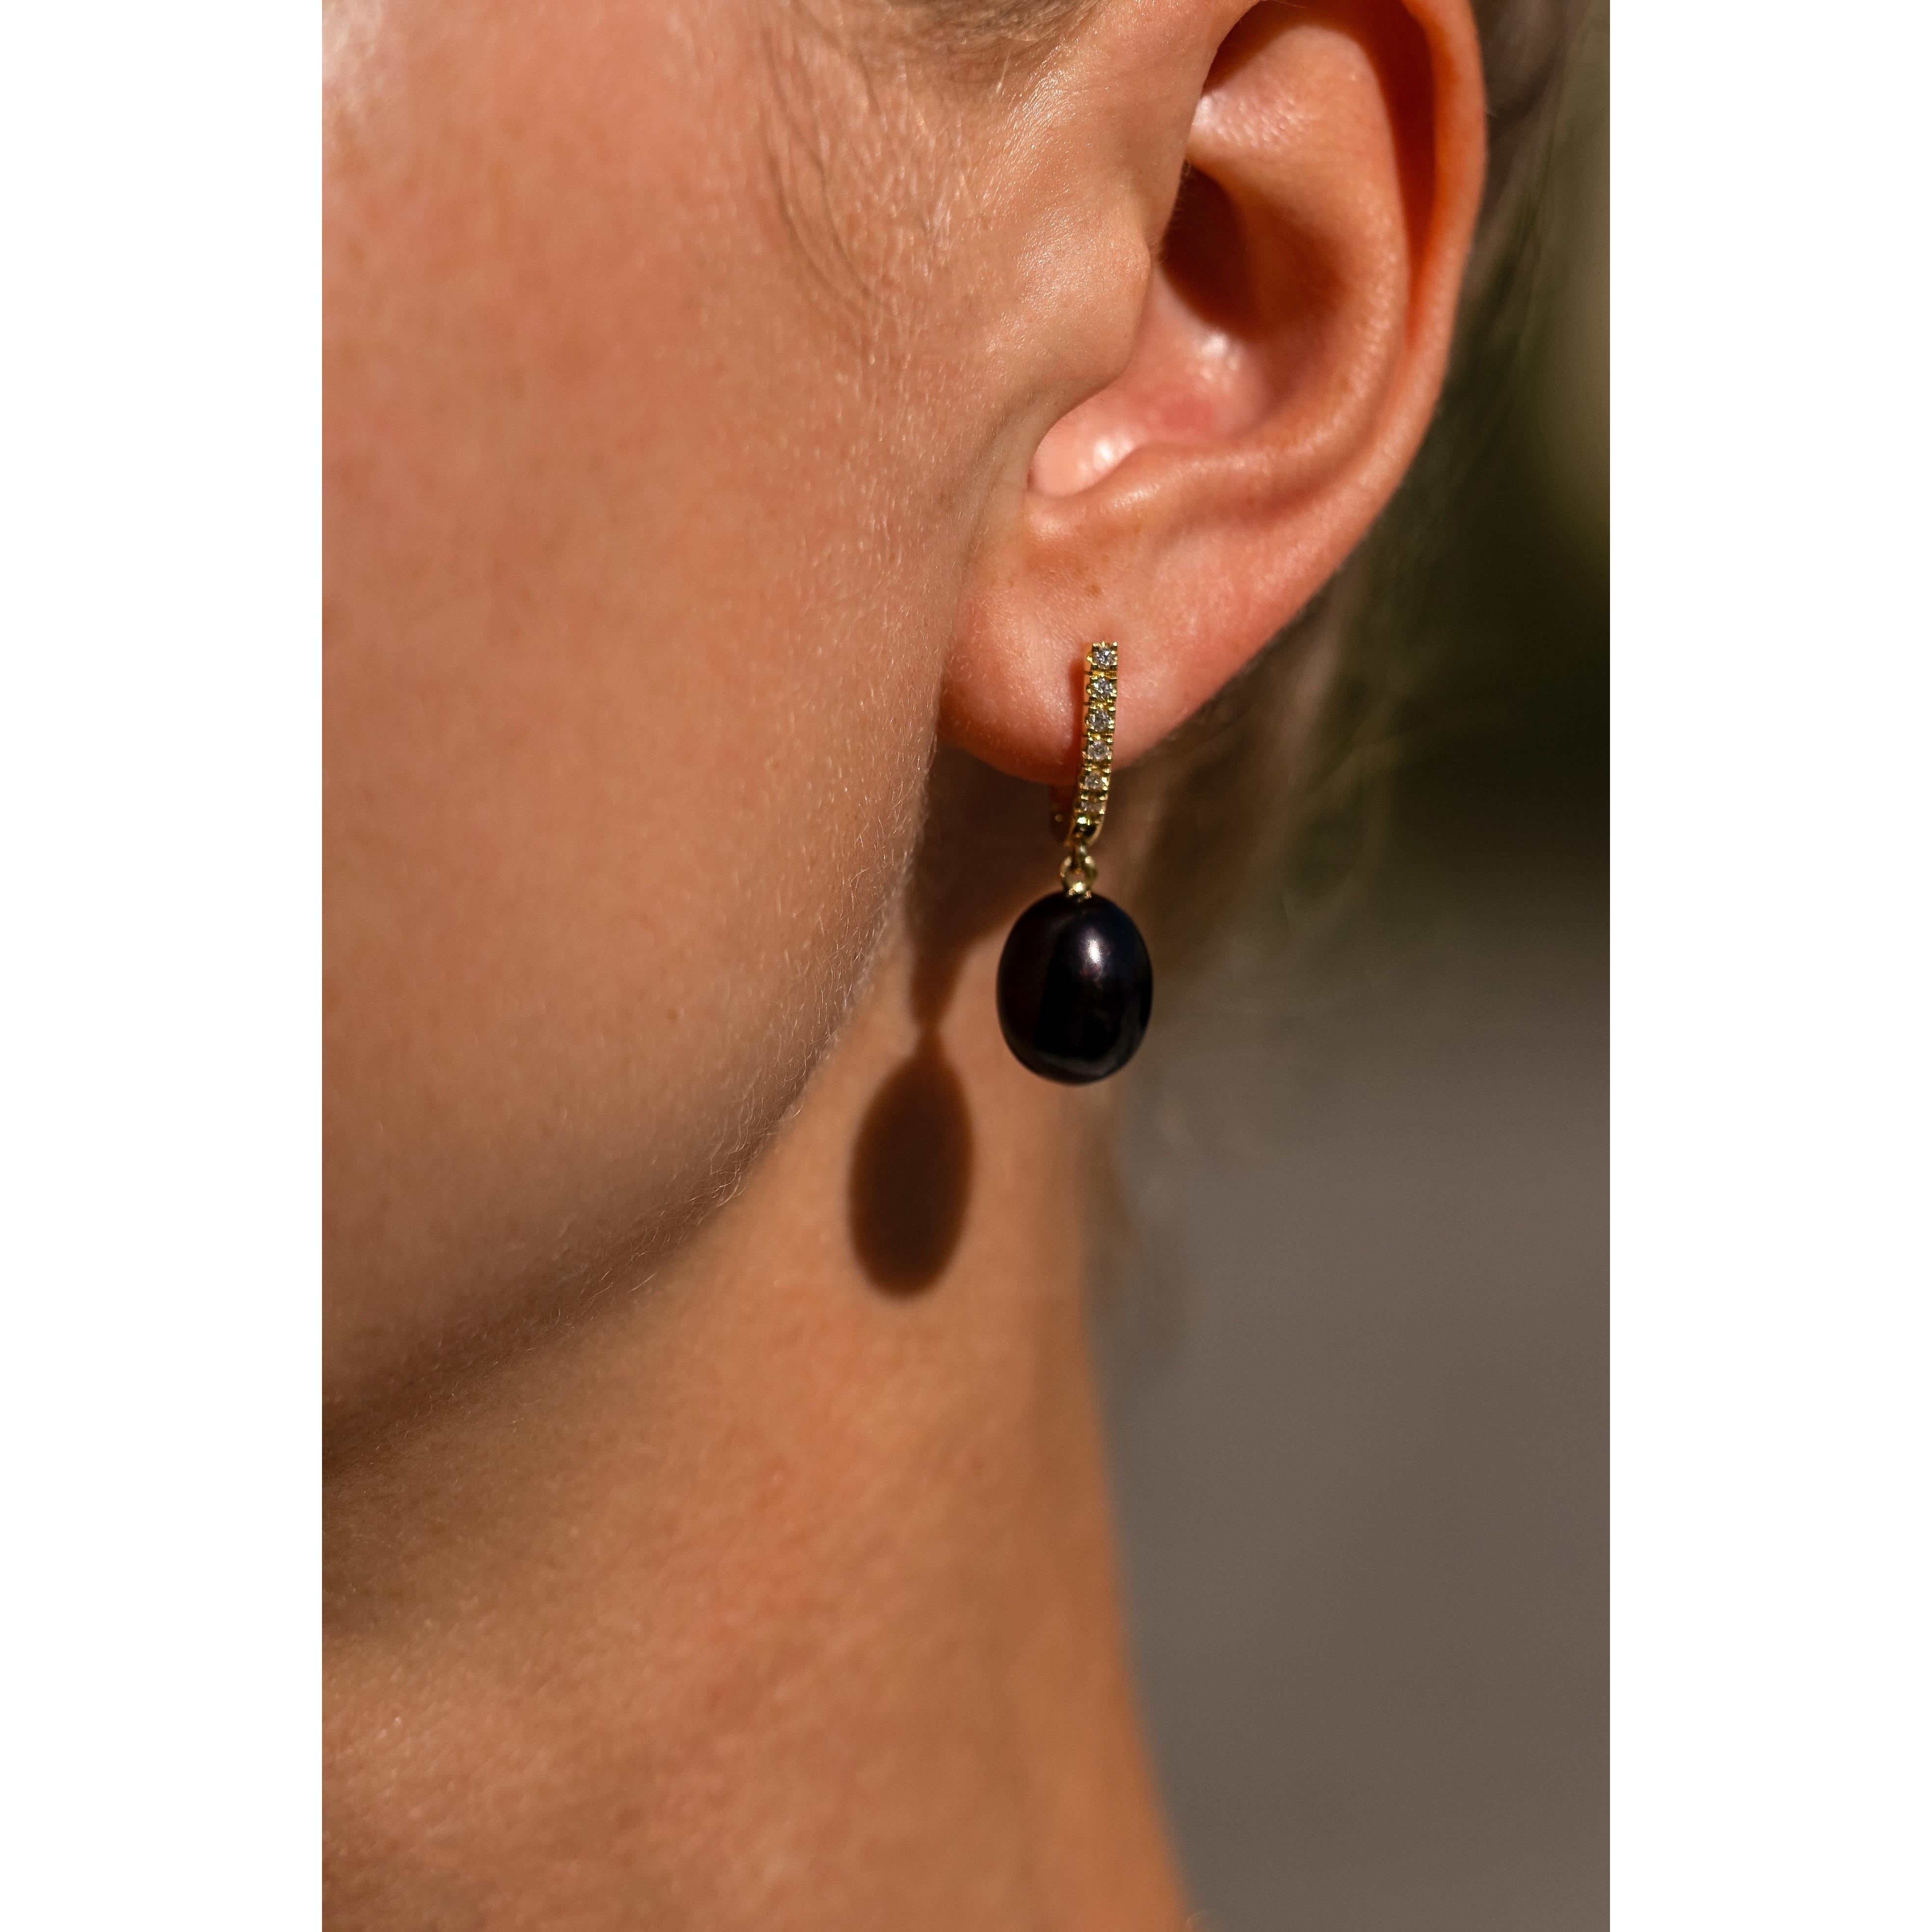 The Black Pearl and Diamond, ear pendants are crafted in 18K yellow gold, hallmarked in Cyprus. These elegant, ear pendants come in a highly polished finish and feature a pair of Black, treated, fresh water Pearls and white Diamonds totaling 0,12